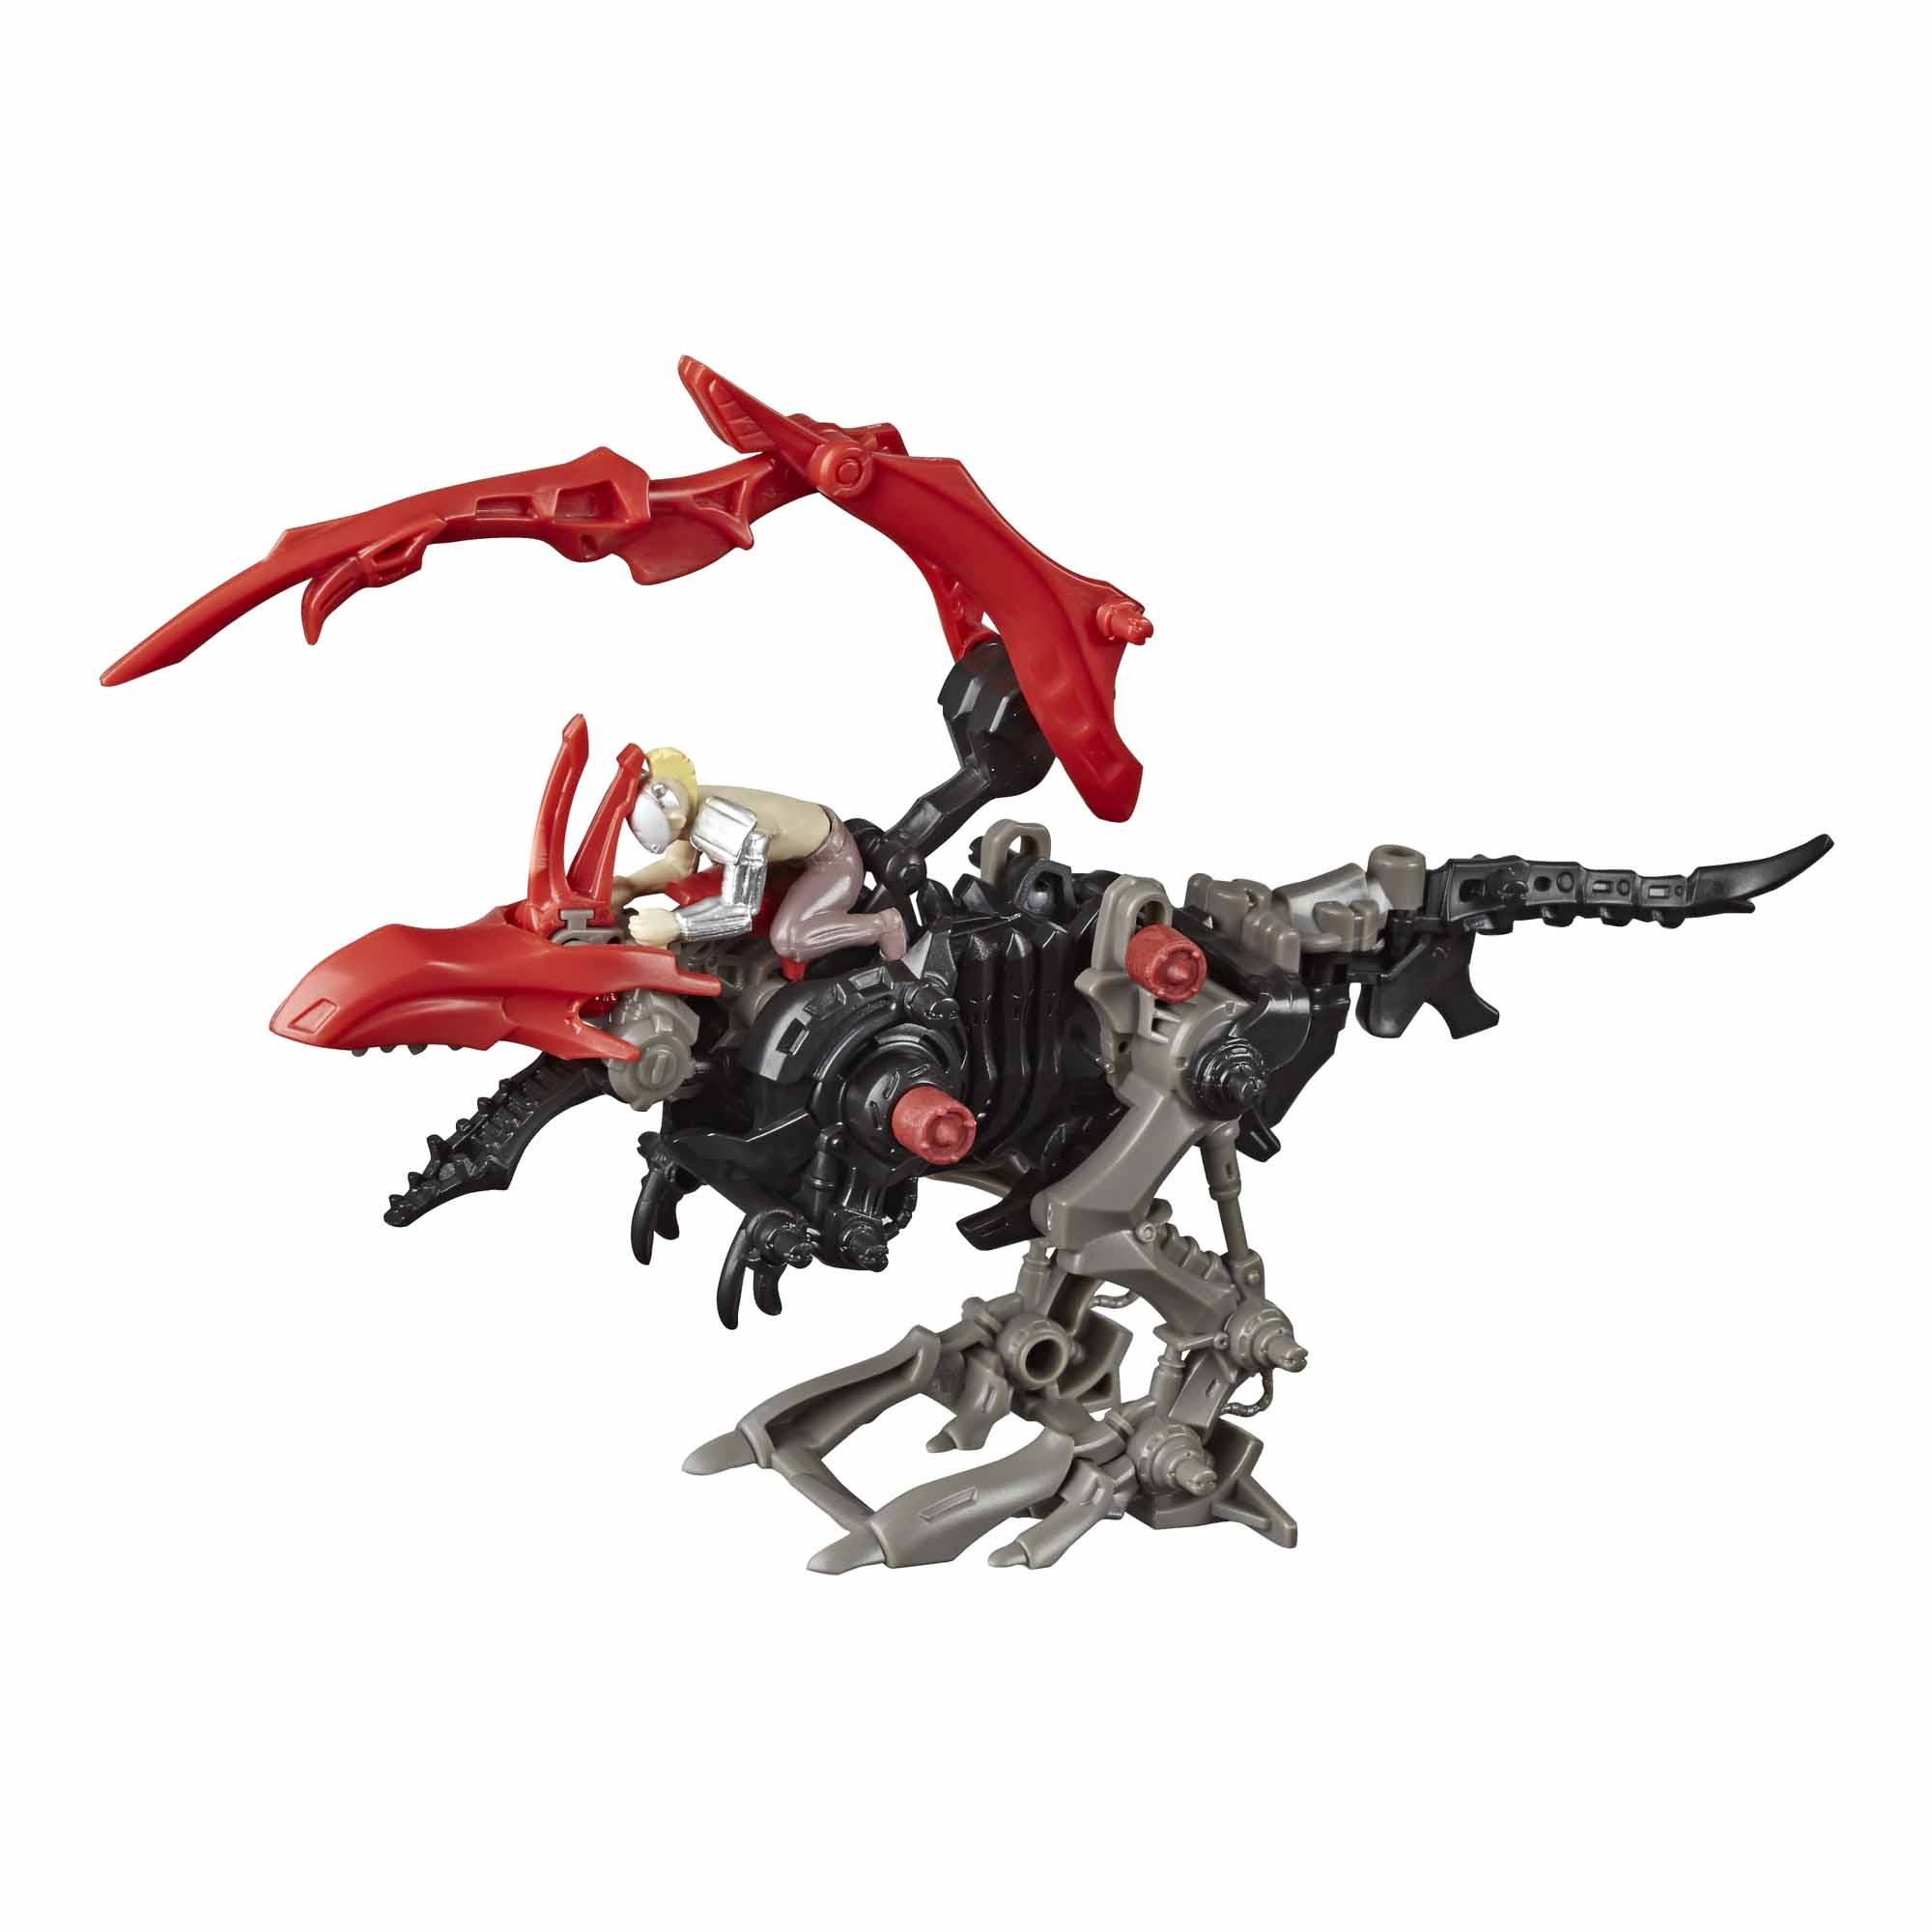 Zoids Mega Battlers Rapterrix - Velociraptor-Type Buildable Beast Figure, Wind-Up Motion - Kids Toys Ages 8 and Up, 27 Pieces